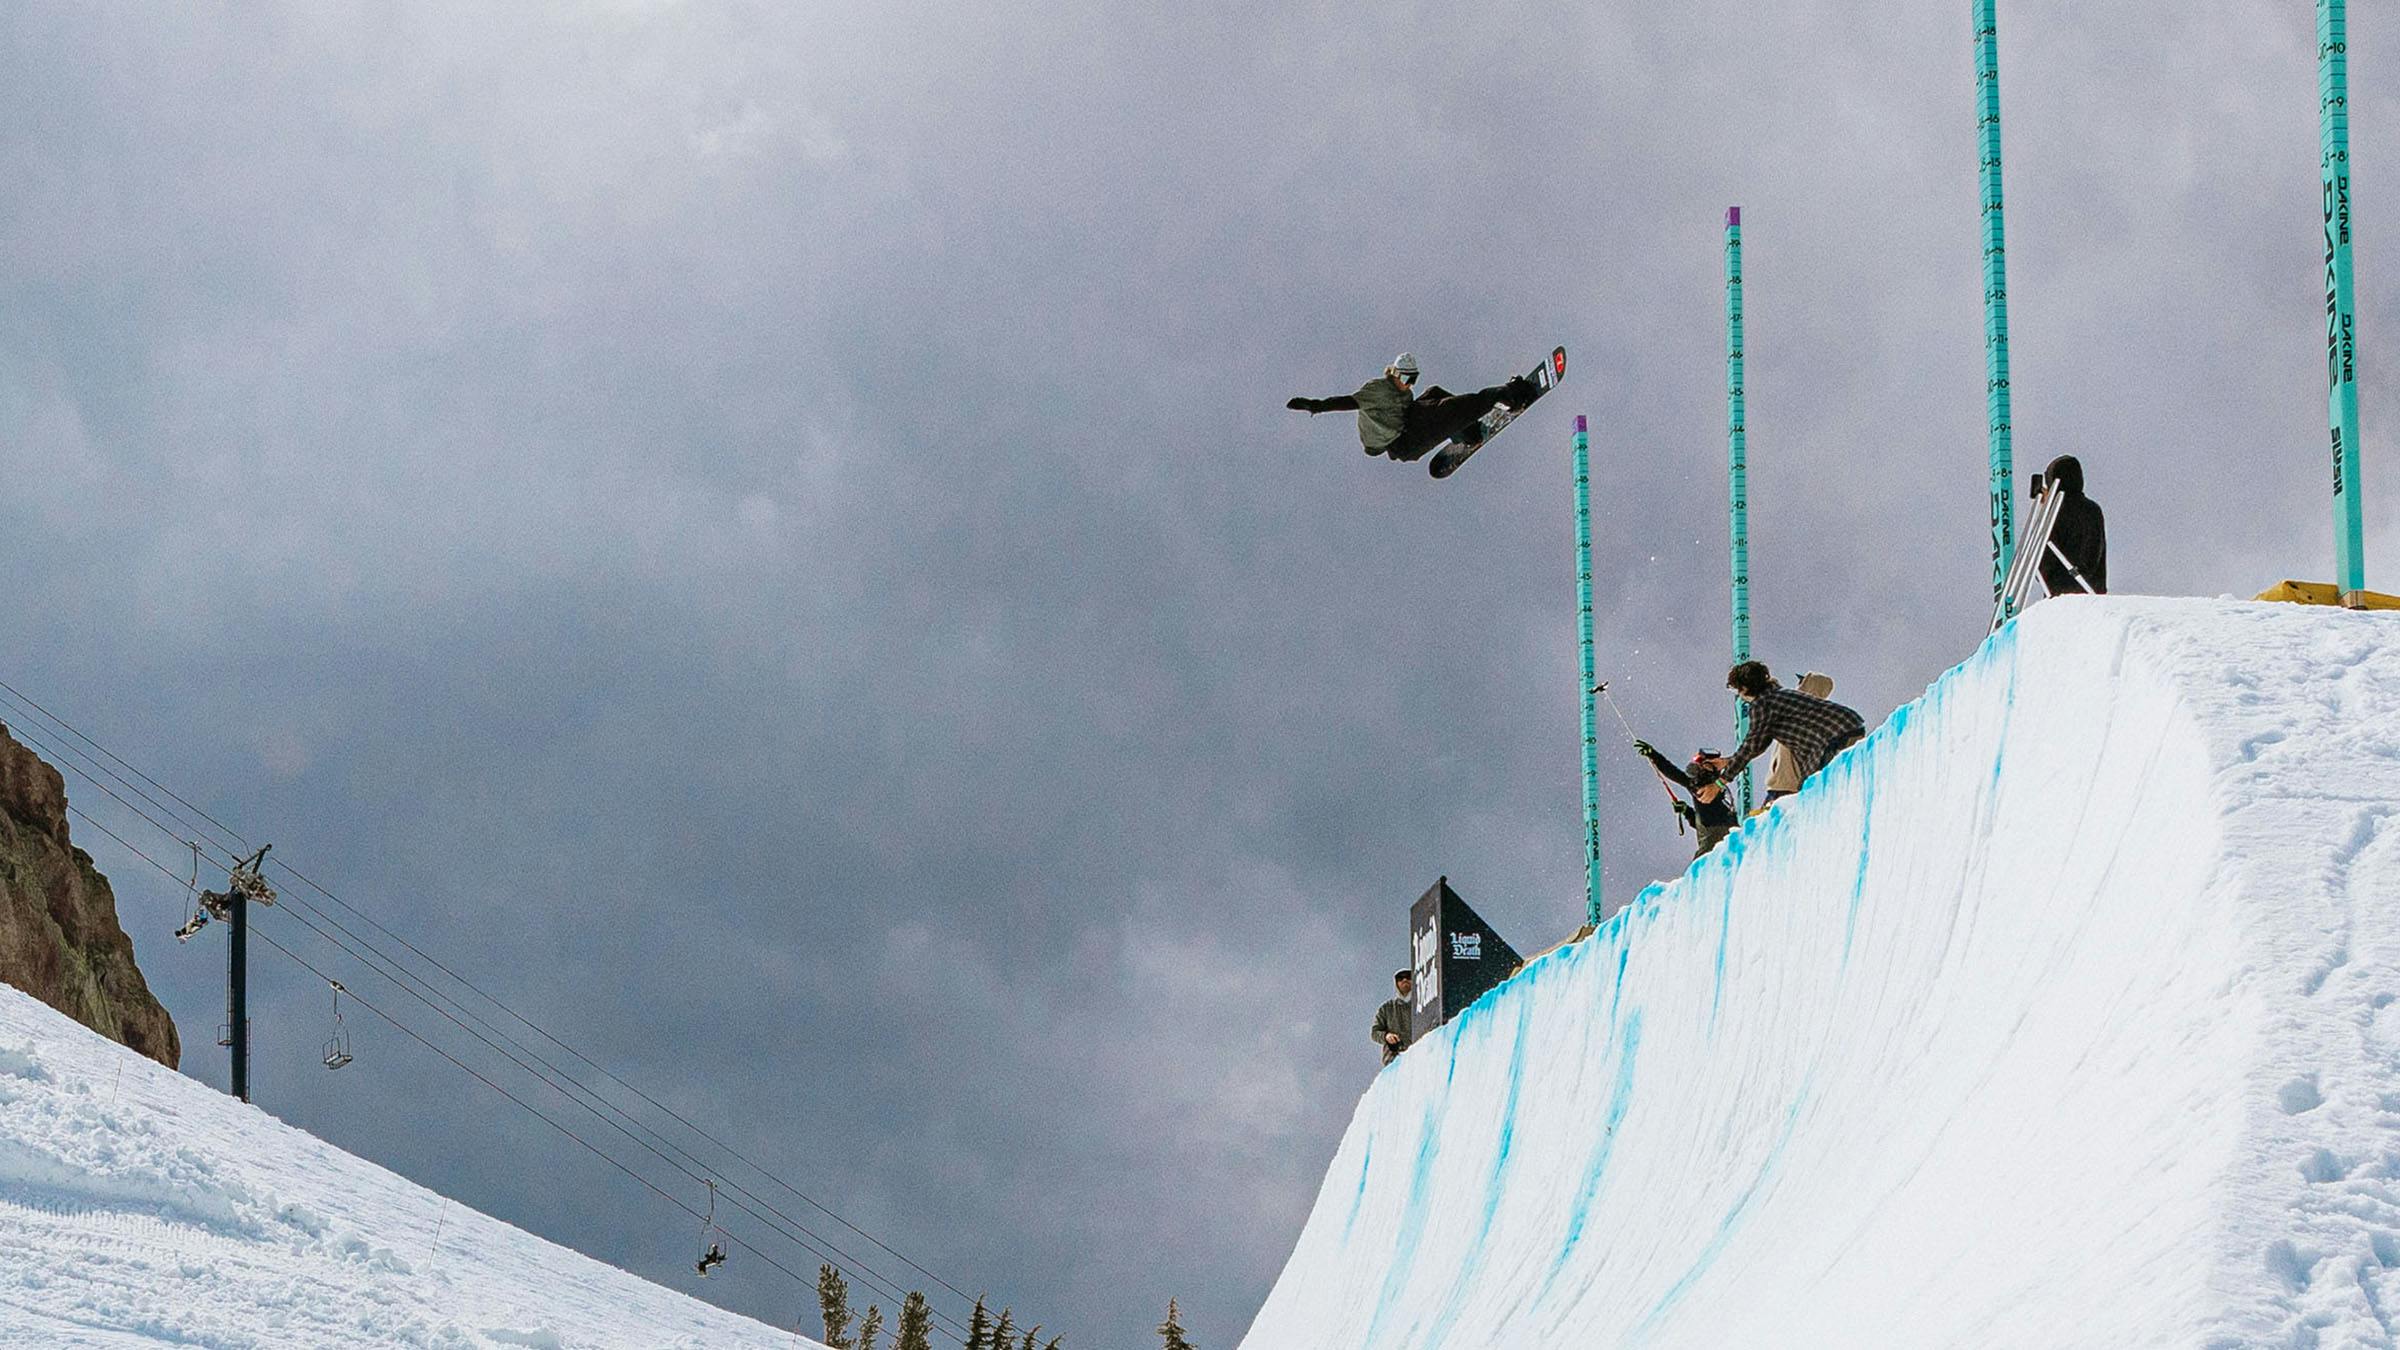  Snowboarder in the air on quarterpipe